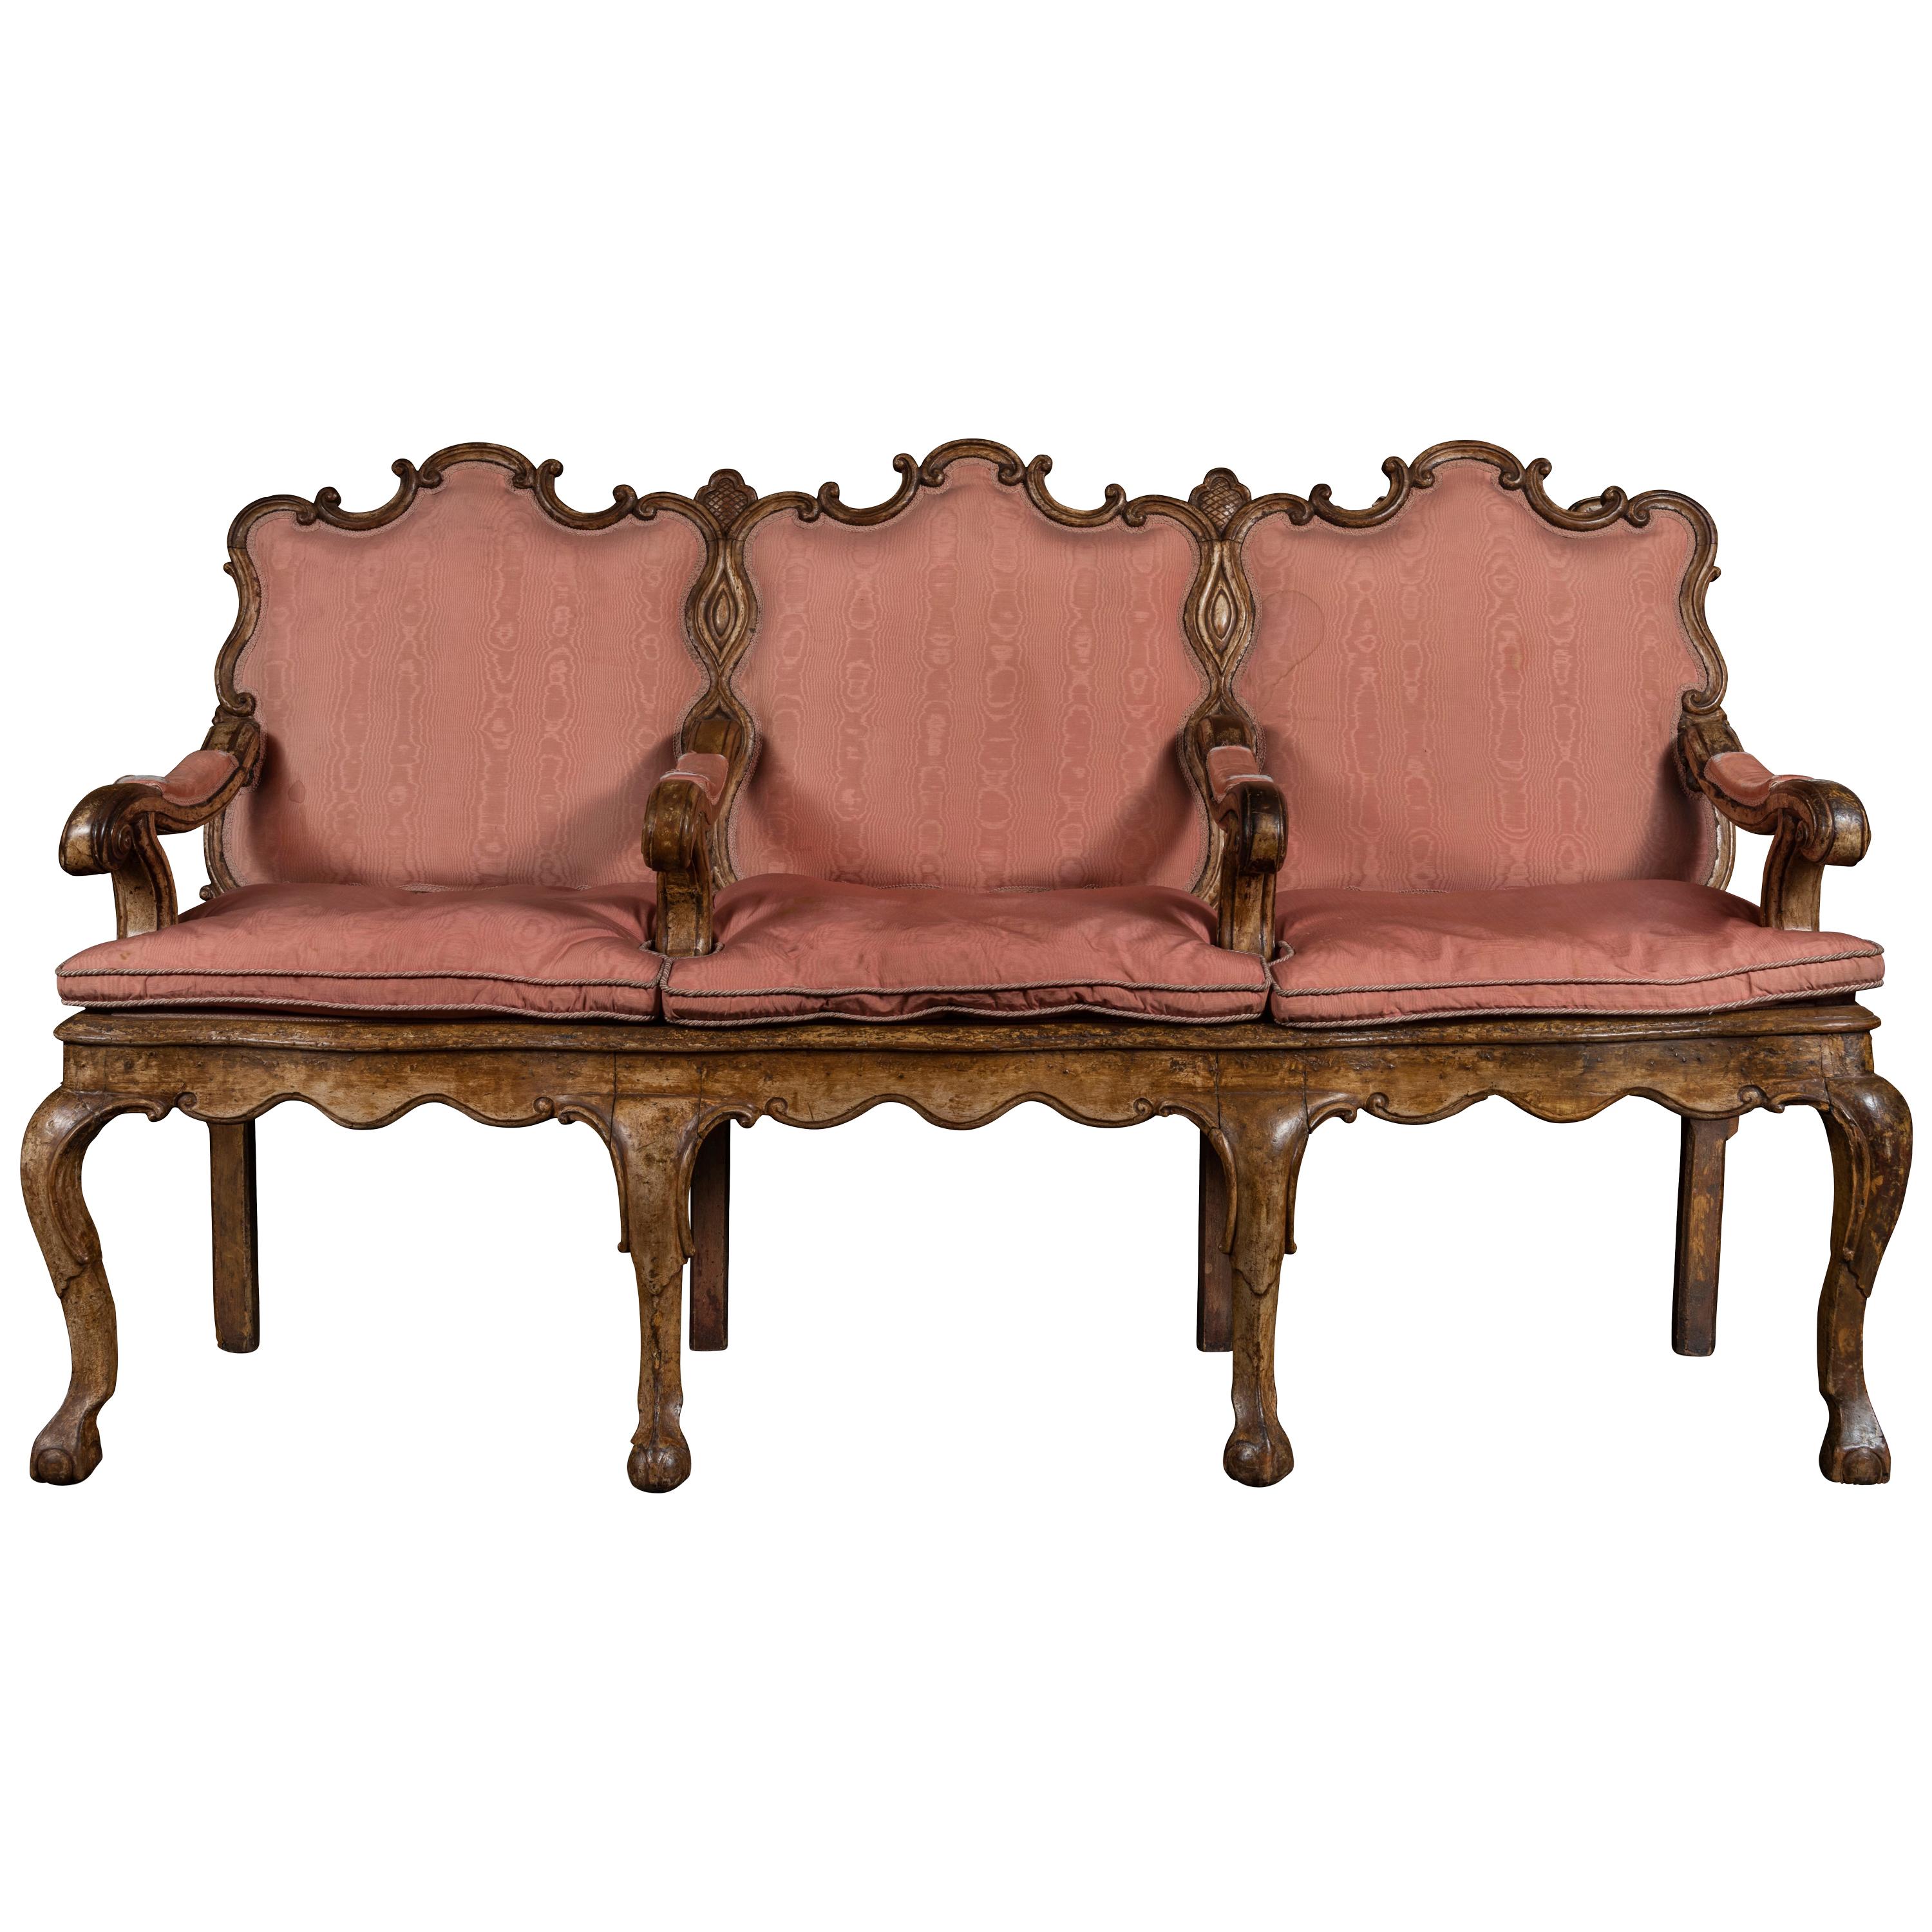 A 17th Century Italian Walnut Three-Seat Divano Upholstered in Pink Silk For Sale